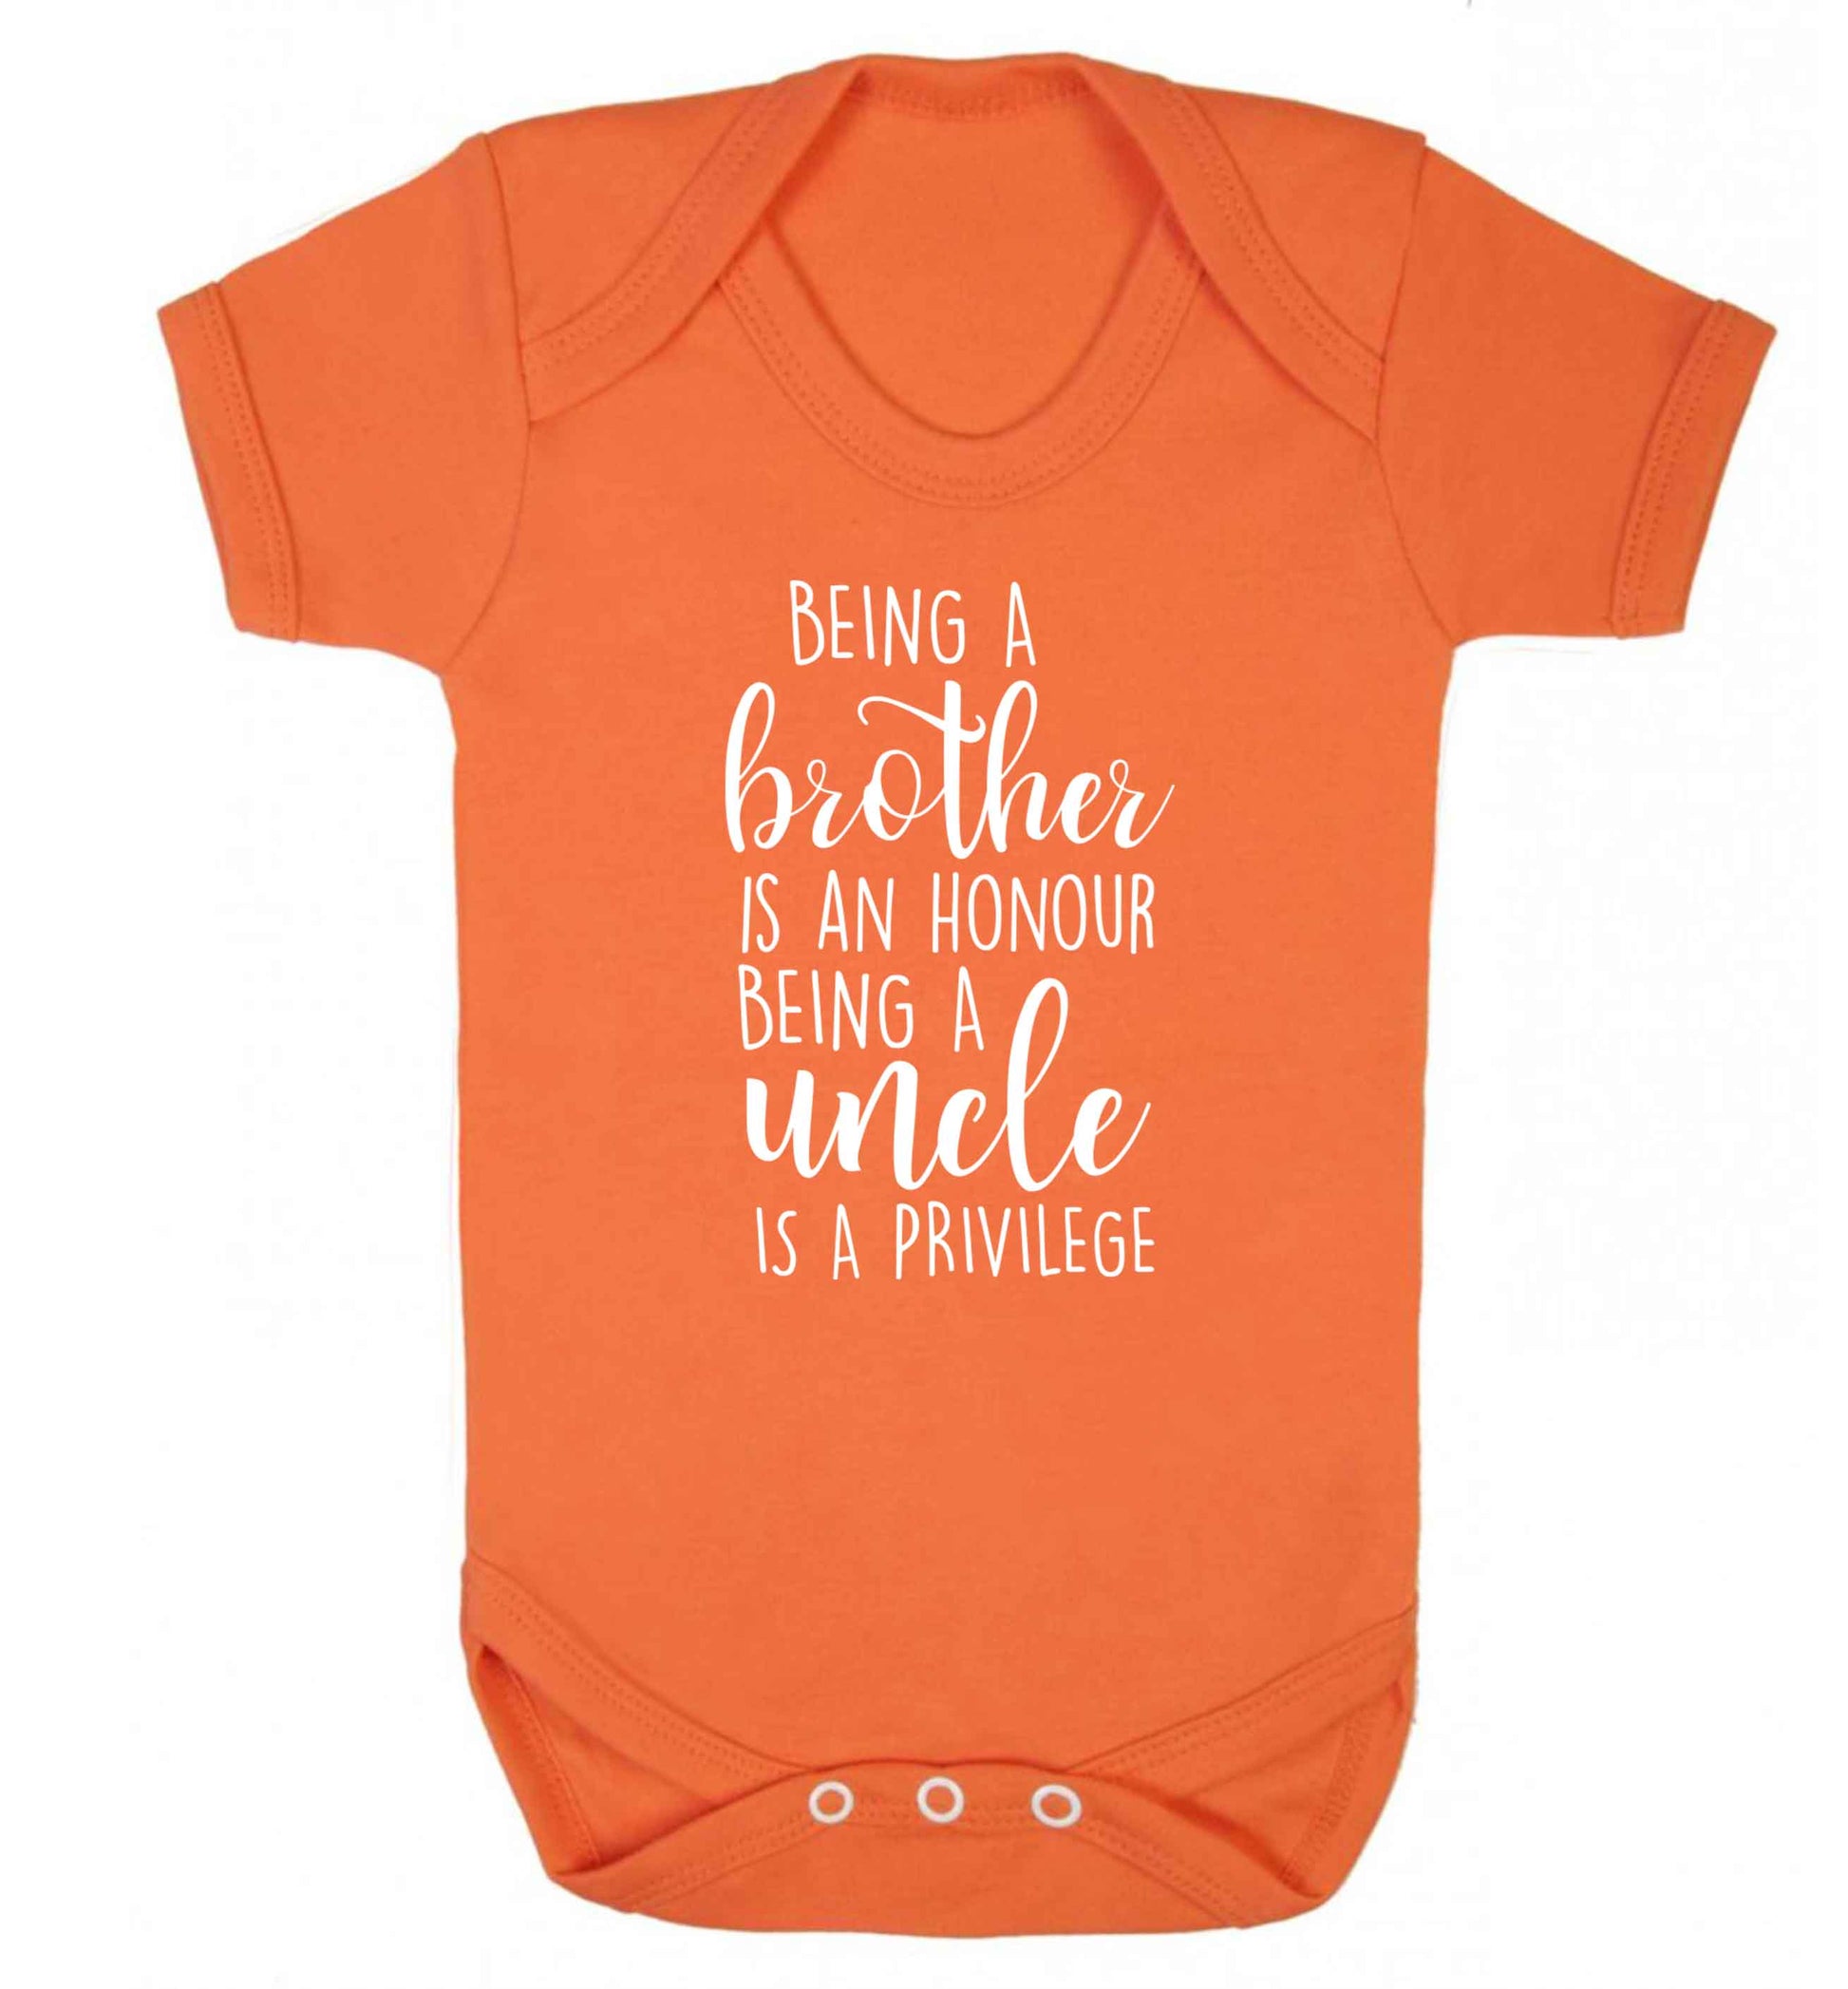 Being a brother is an honour being an uncle is a privilege Baby Vest orange 18-24 months